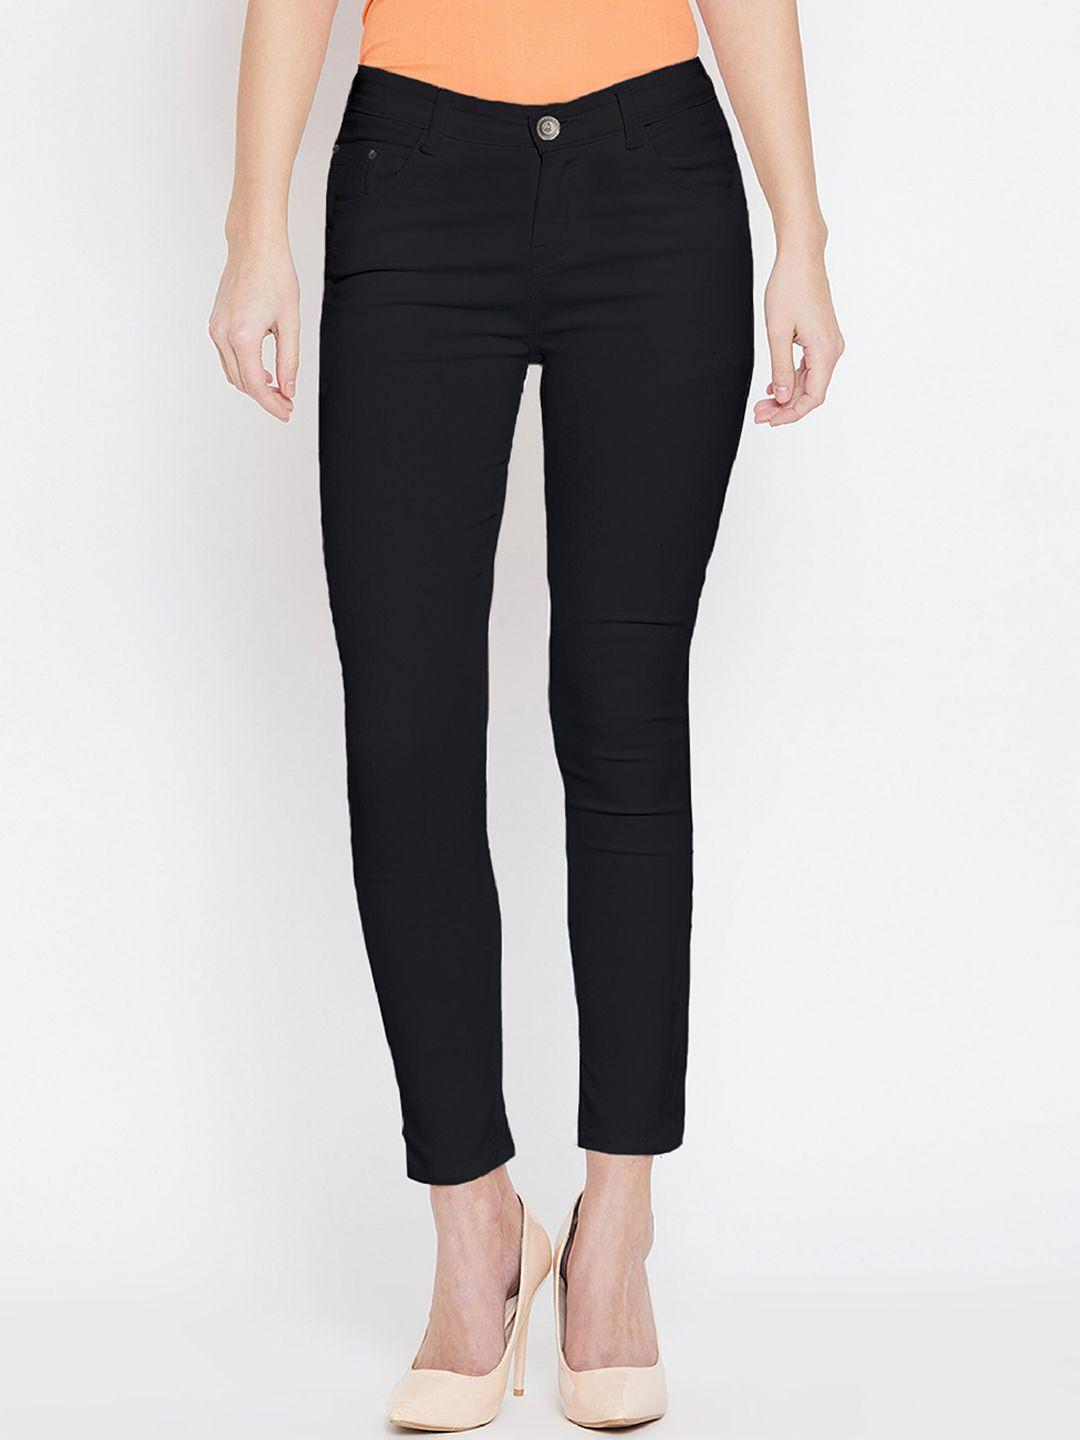 the-dry-state-women-black-mid-rise-slim-fit-jeans